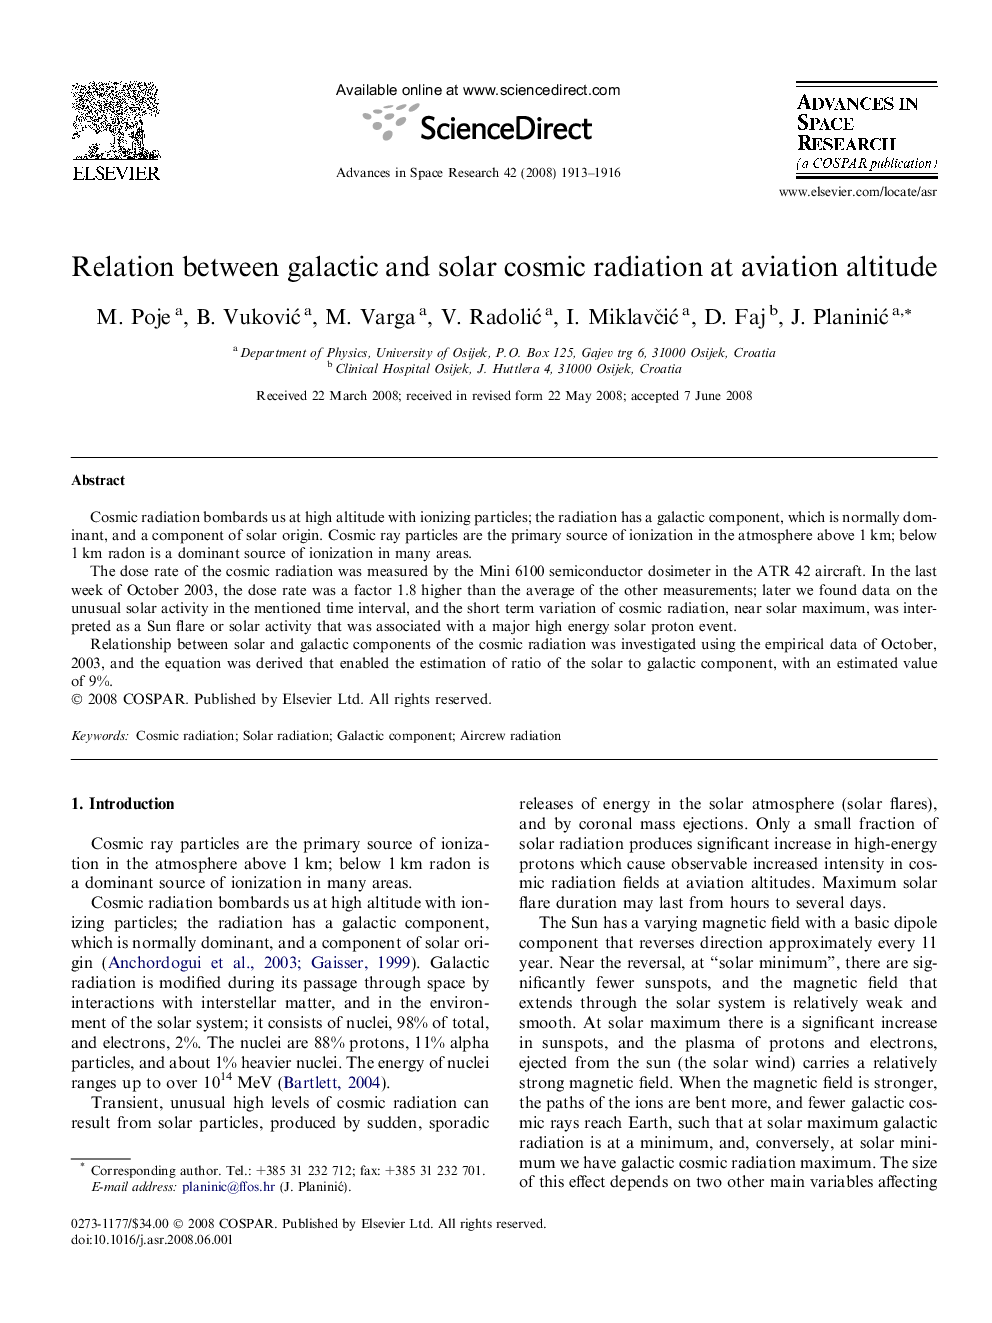 Relation between galactic and solar cosmic radiation at aviation altitude